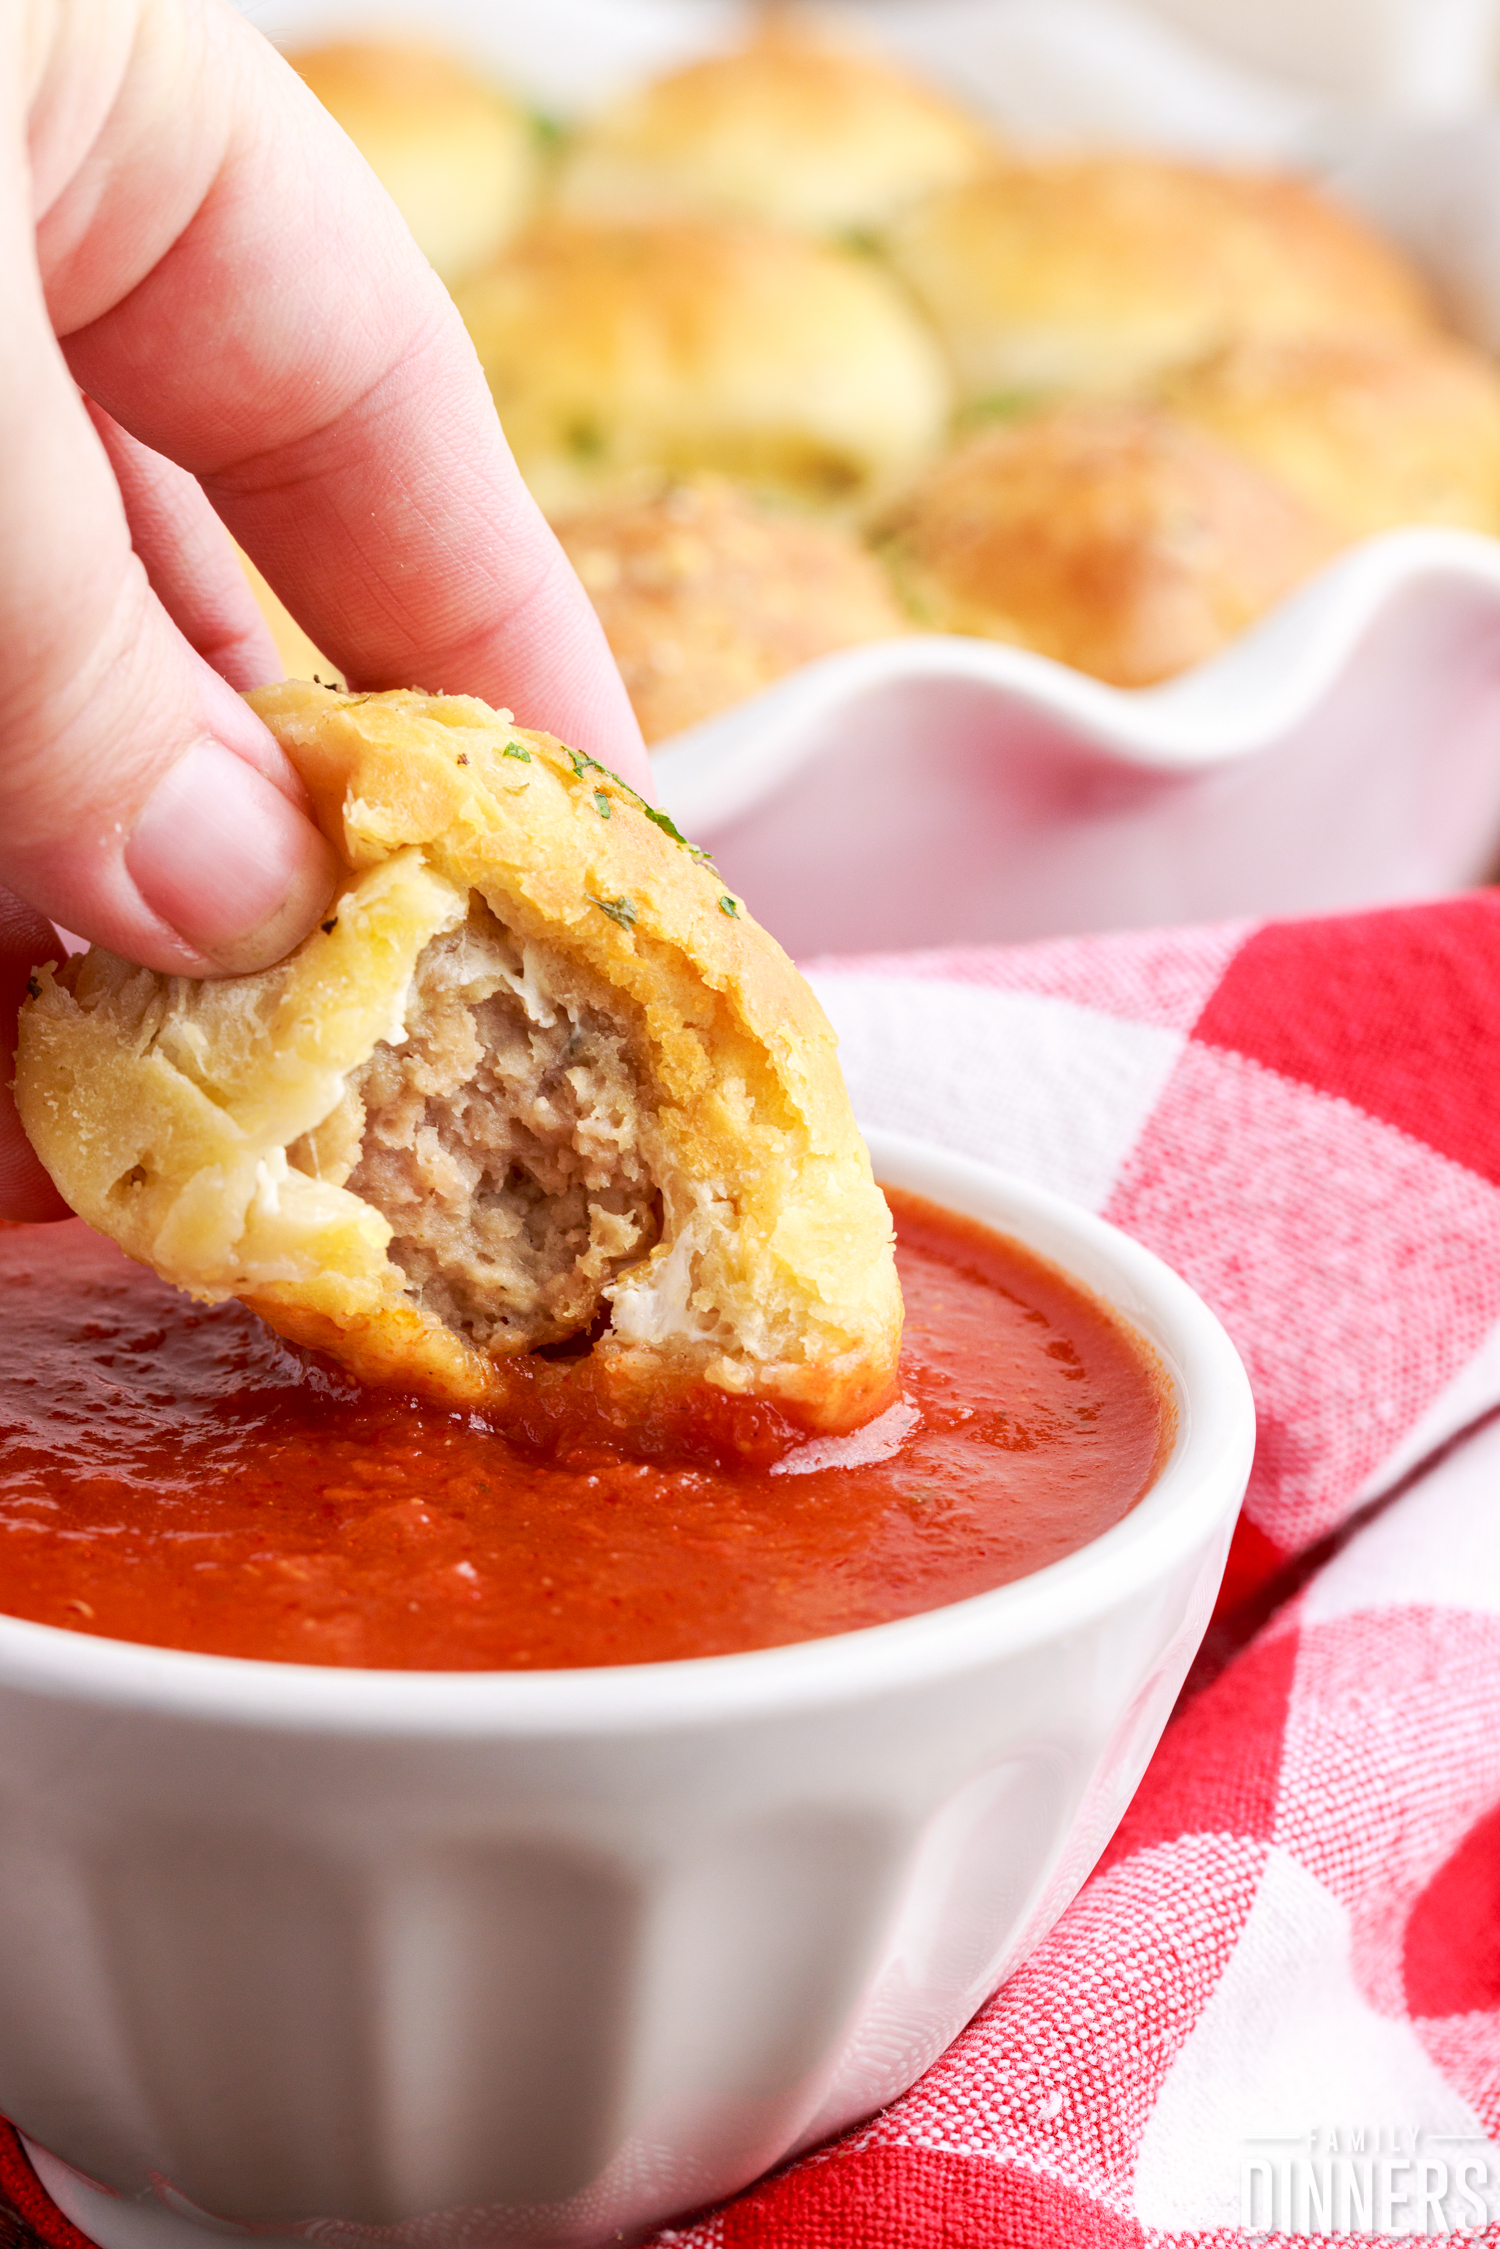 mozzarella meatball bomb with a bite taken out being dipped into marinara sauce